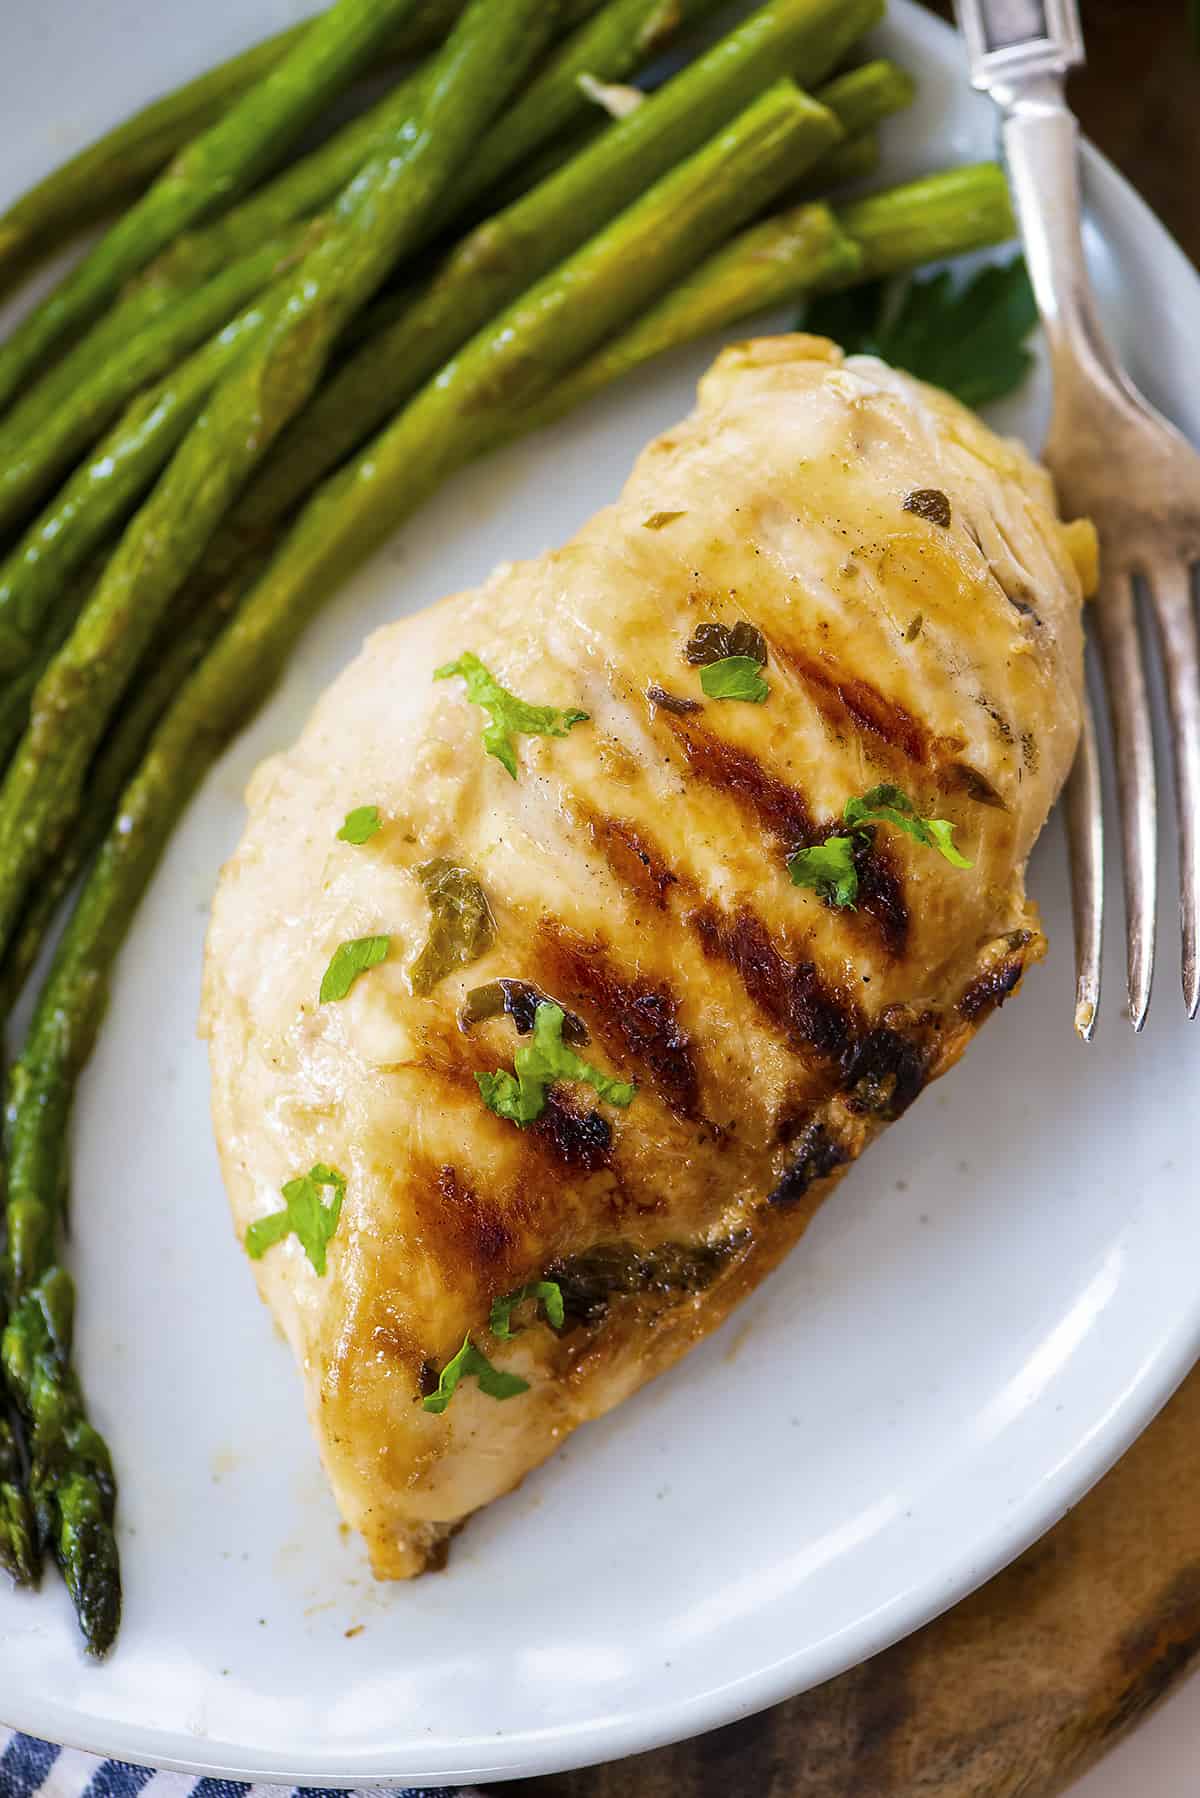 Ranch grilled chicken on plate with asparagus.